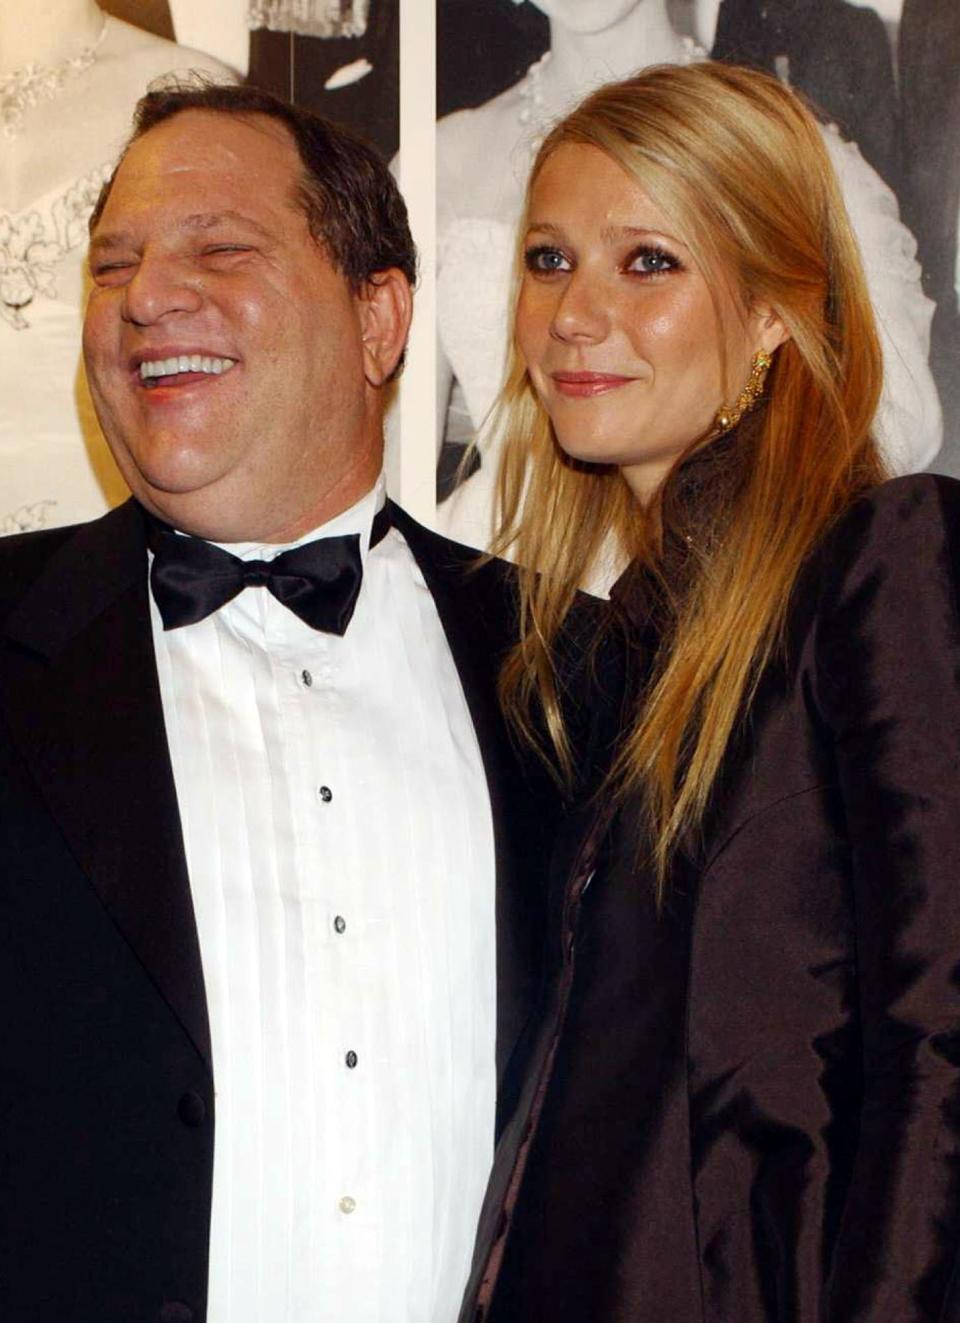 Film producer Harvey Weinstein and actress Gwyneth Paltrow arrive for the 50th anniversary gala of the NFT at the National Film Theatre on the South Bank in London.   (Photo by Yui Mok - PA Images/PA Images via Getty Images)